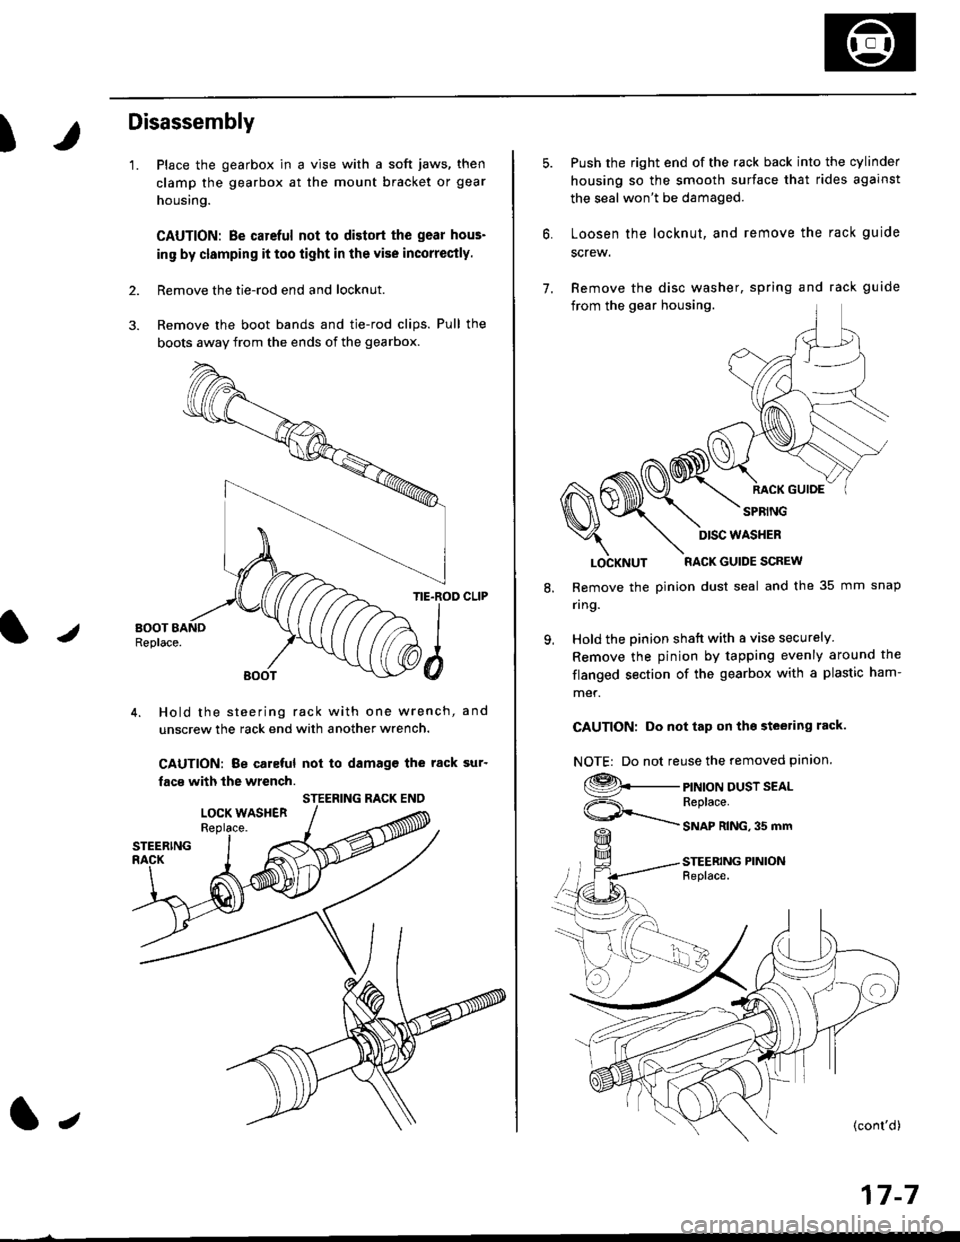 HONDA CIVIC 1998 6.G User Guide )
Disassembly
1.
2.
Place the gearbox in a vise with a soft jaws, then
clamp the gearbox at the mount bracket or gear
housing.
CAUTION: Be carcful not to distort the gear hous-
in9 by clamping it too